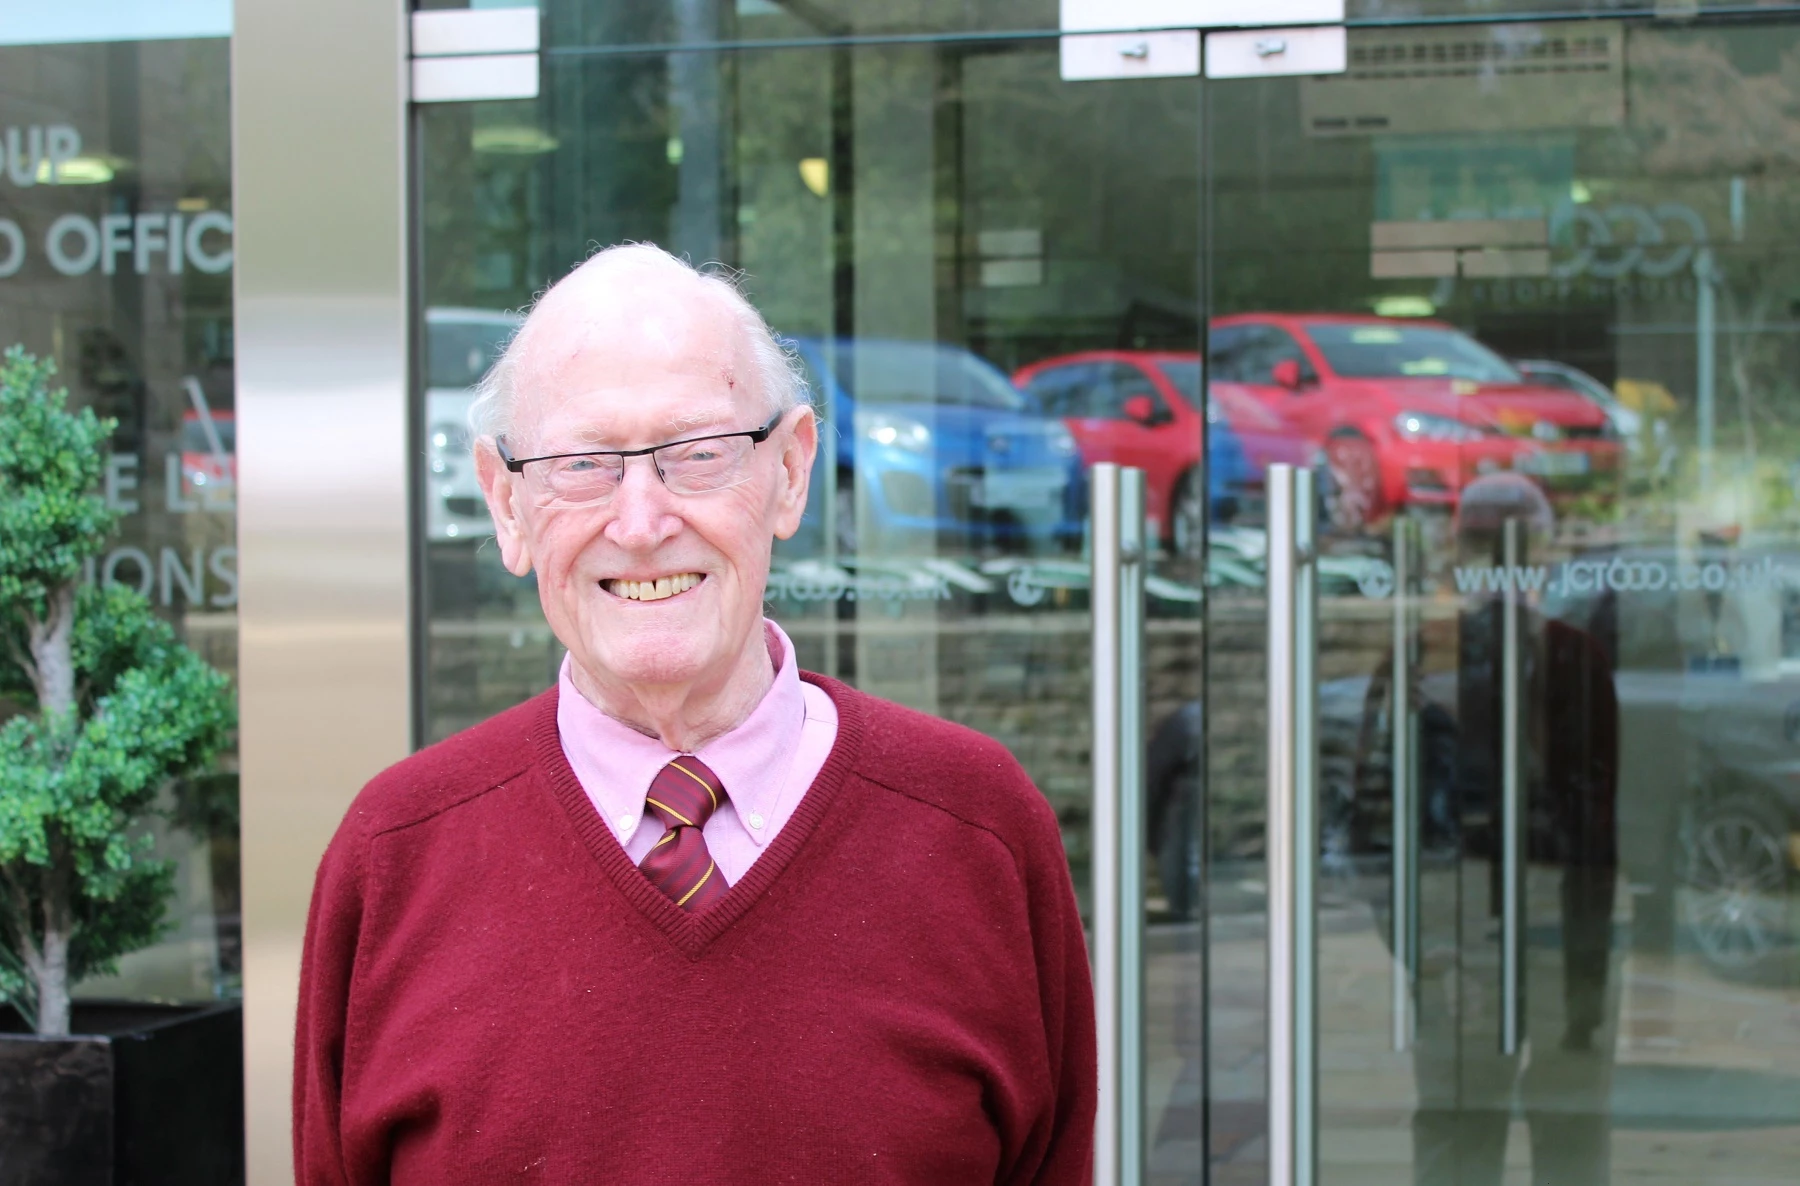 Jack Tordoff, founder and chairman of JCT600